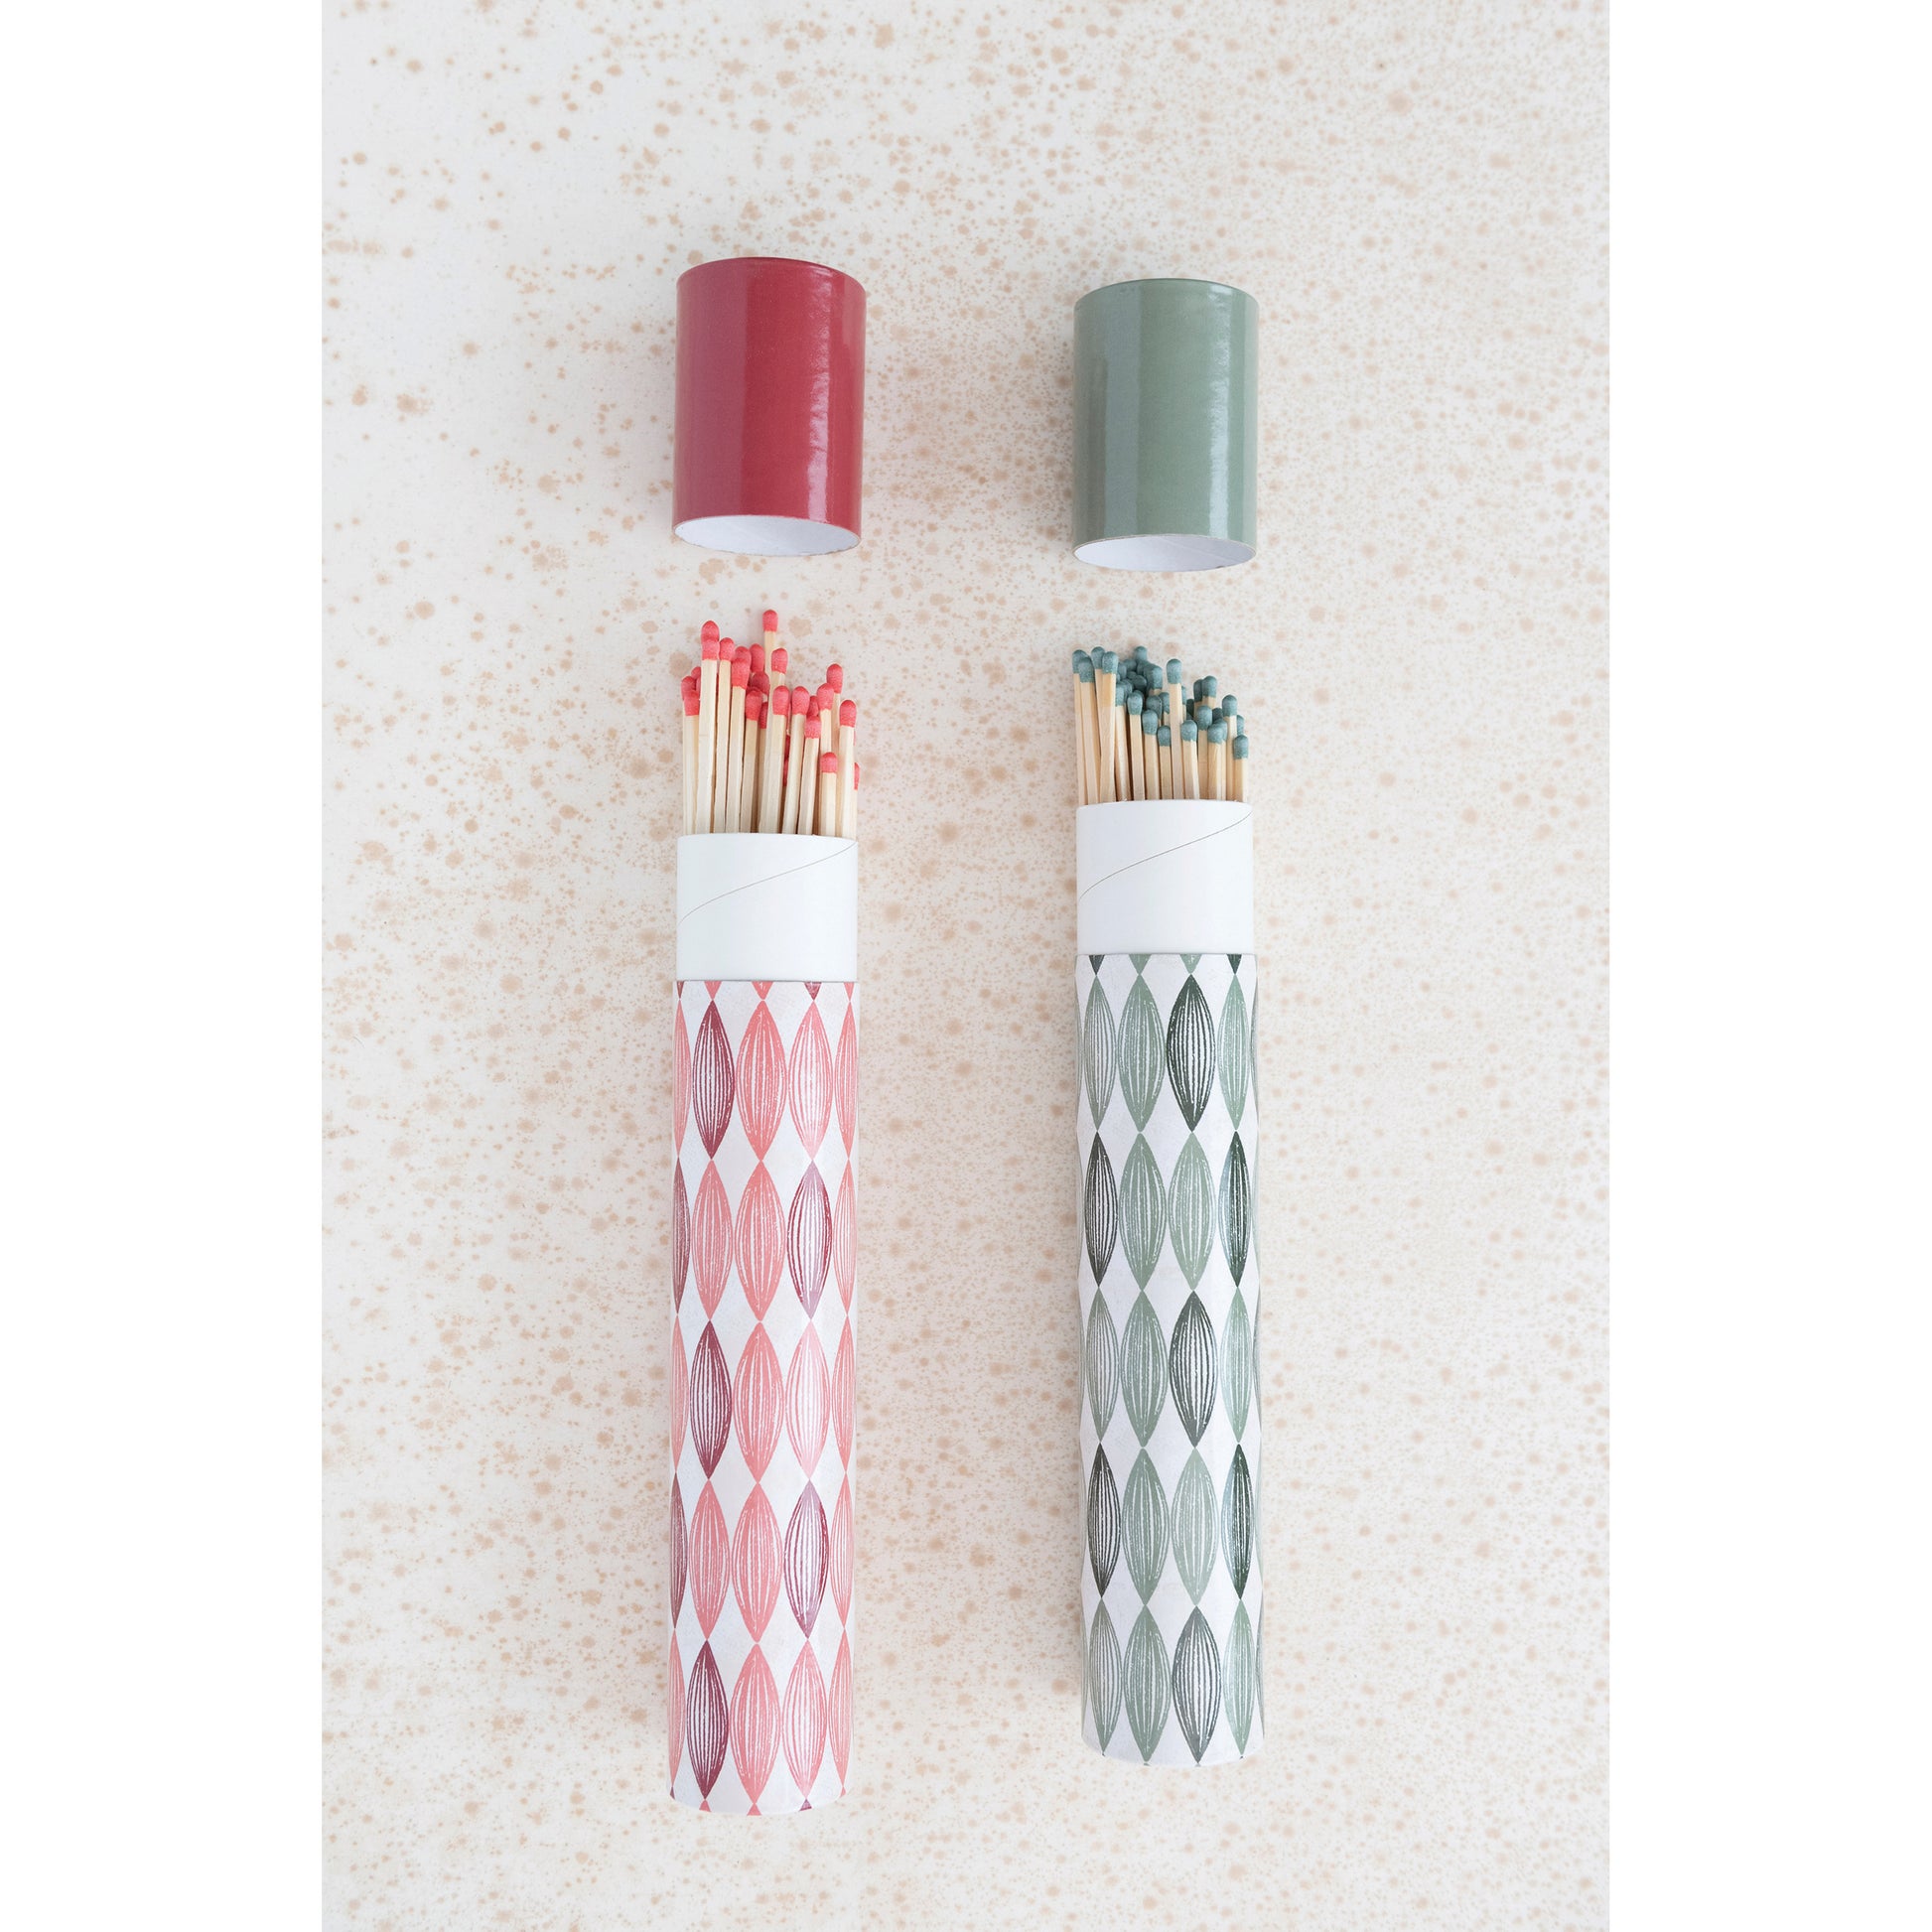 Fireplace Safety Matches in Tube